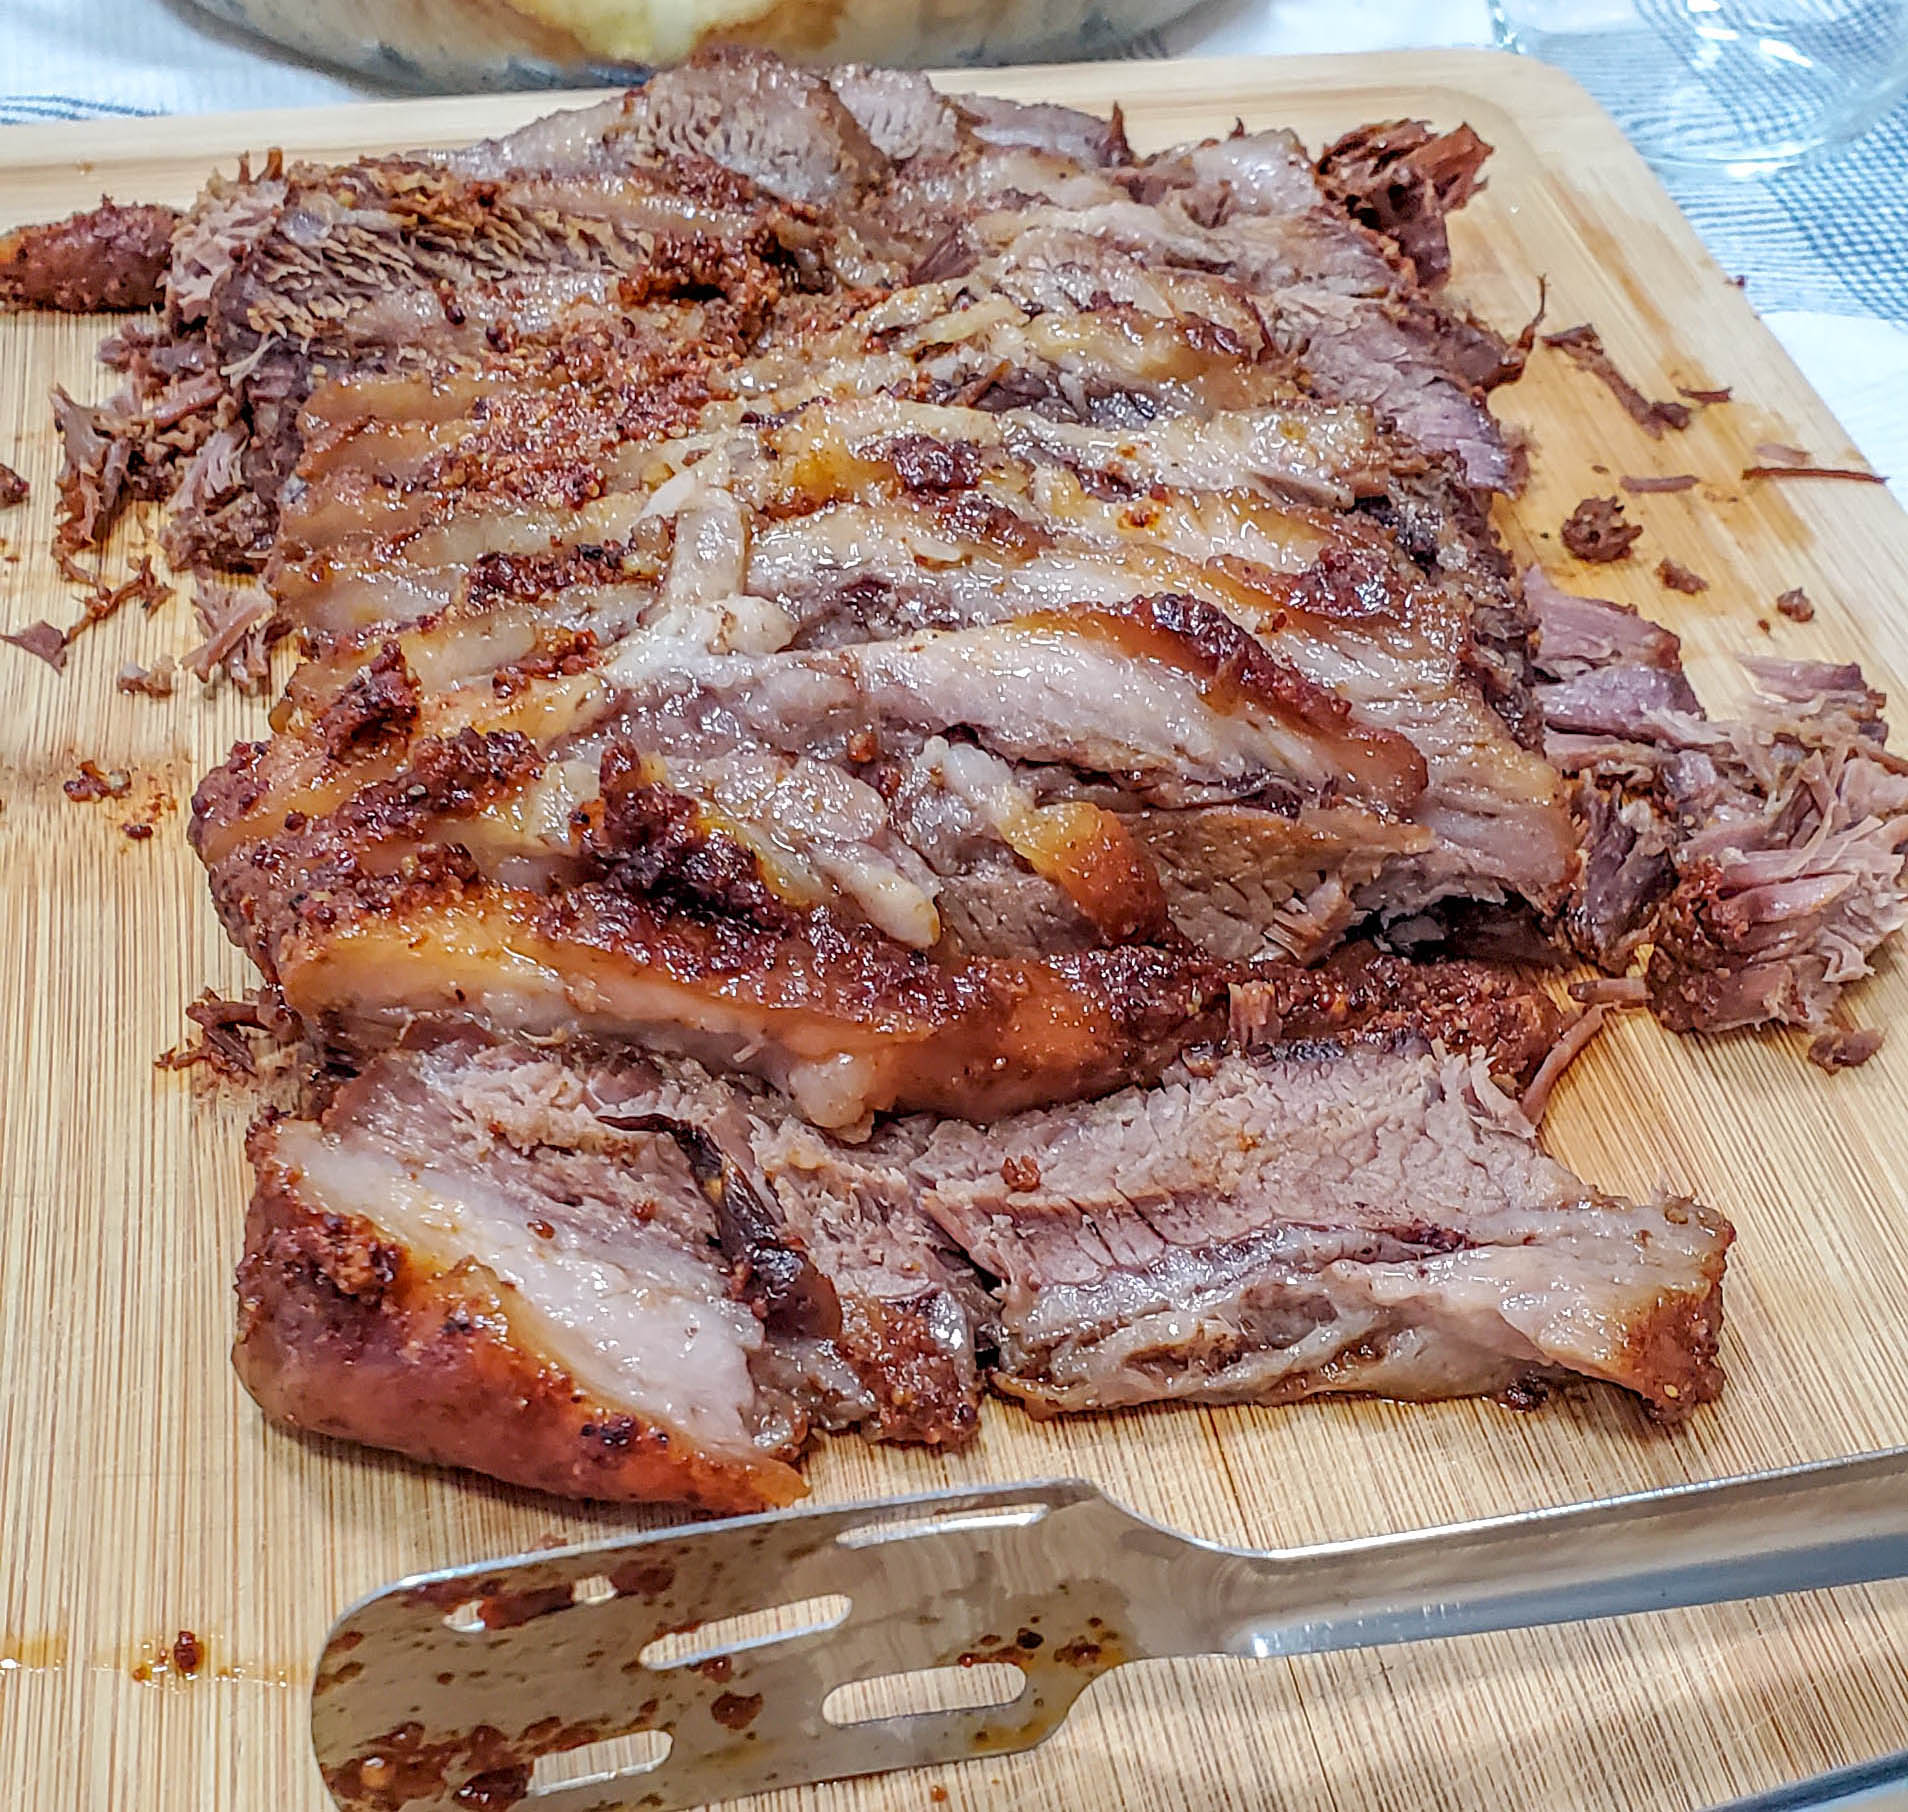 Oven Baked Brisket Recipe - With Paprika and Hickory Liquid Smoke